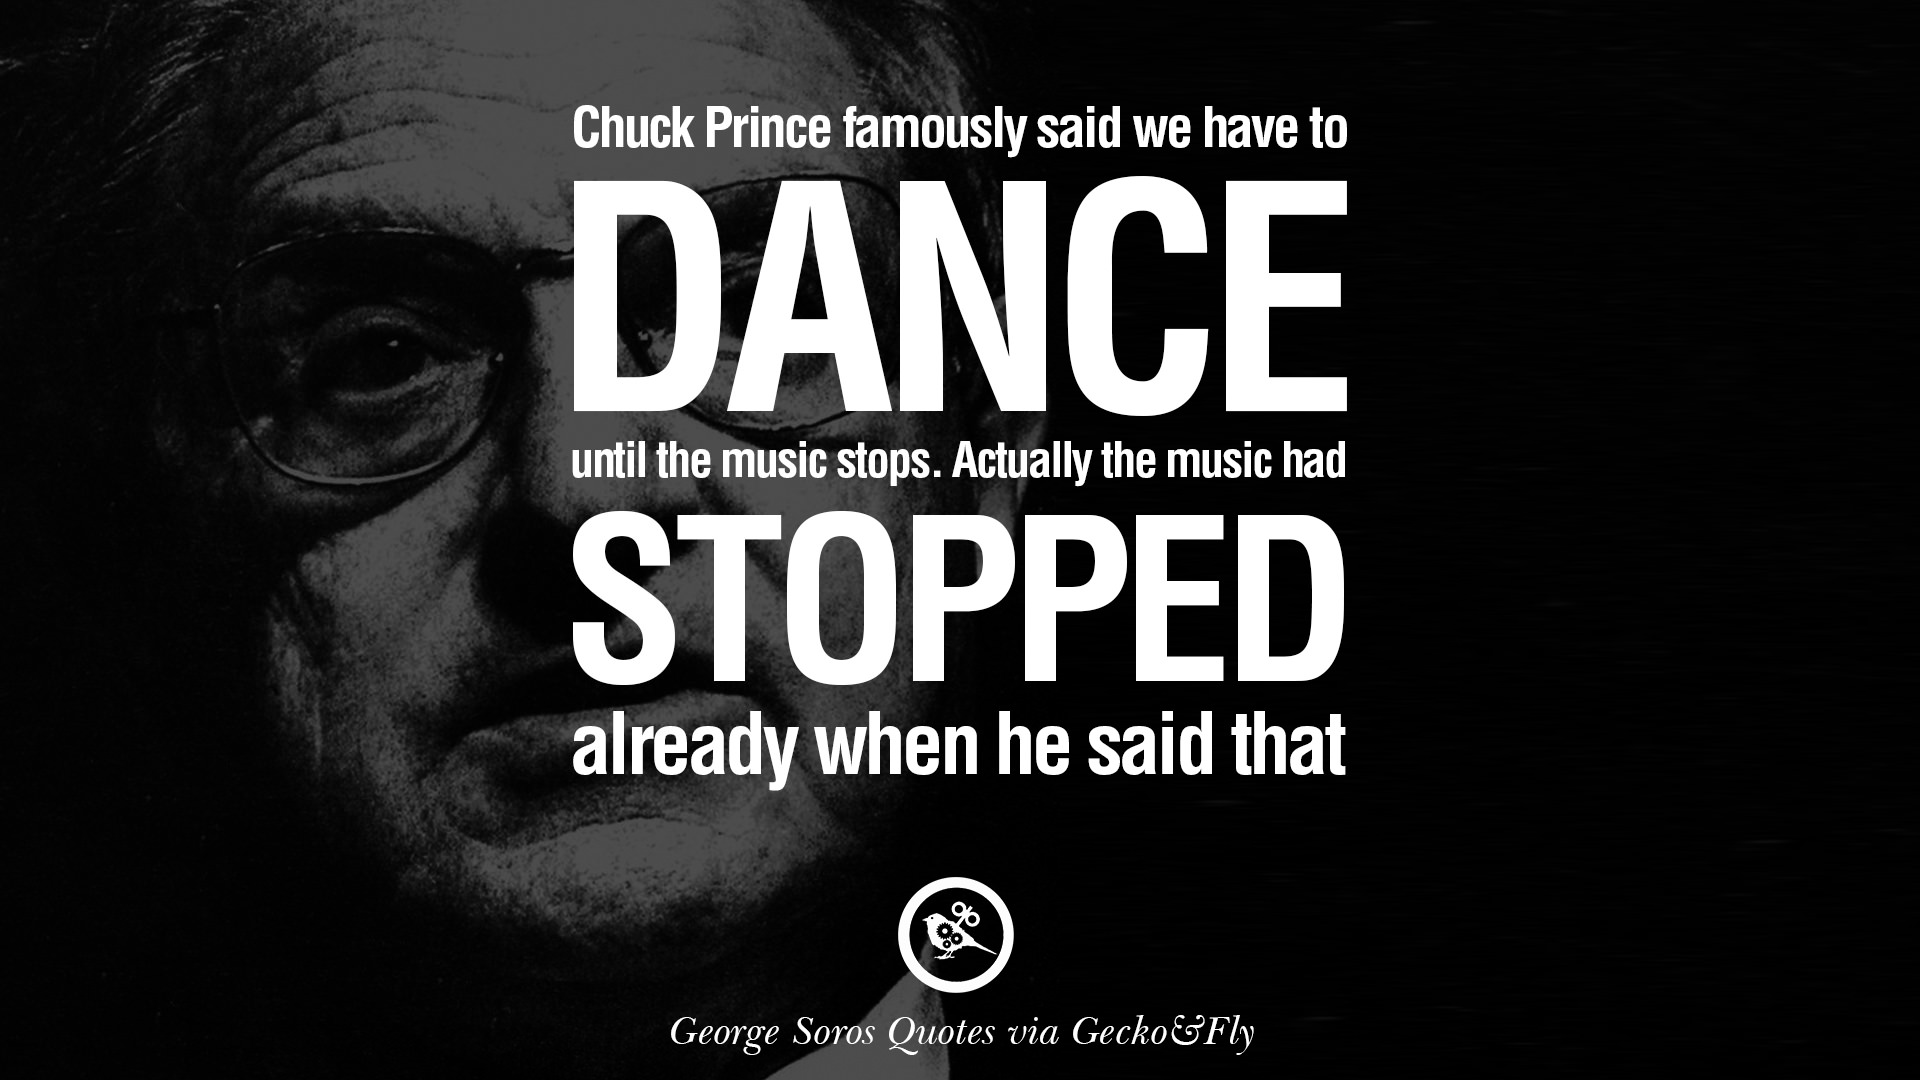 Dance Quotes Wallpaper 36 image collections of wallpapers